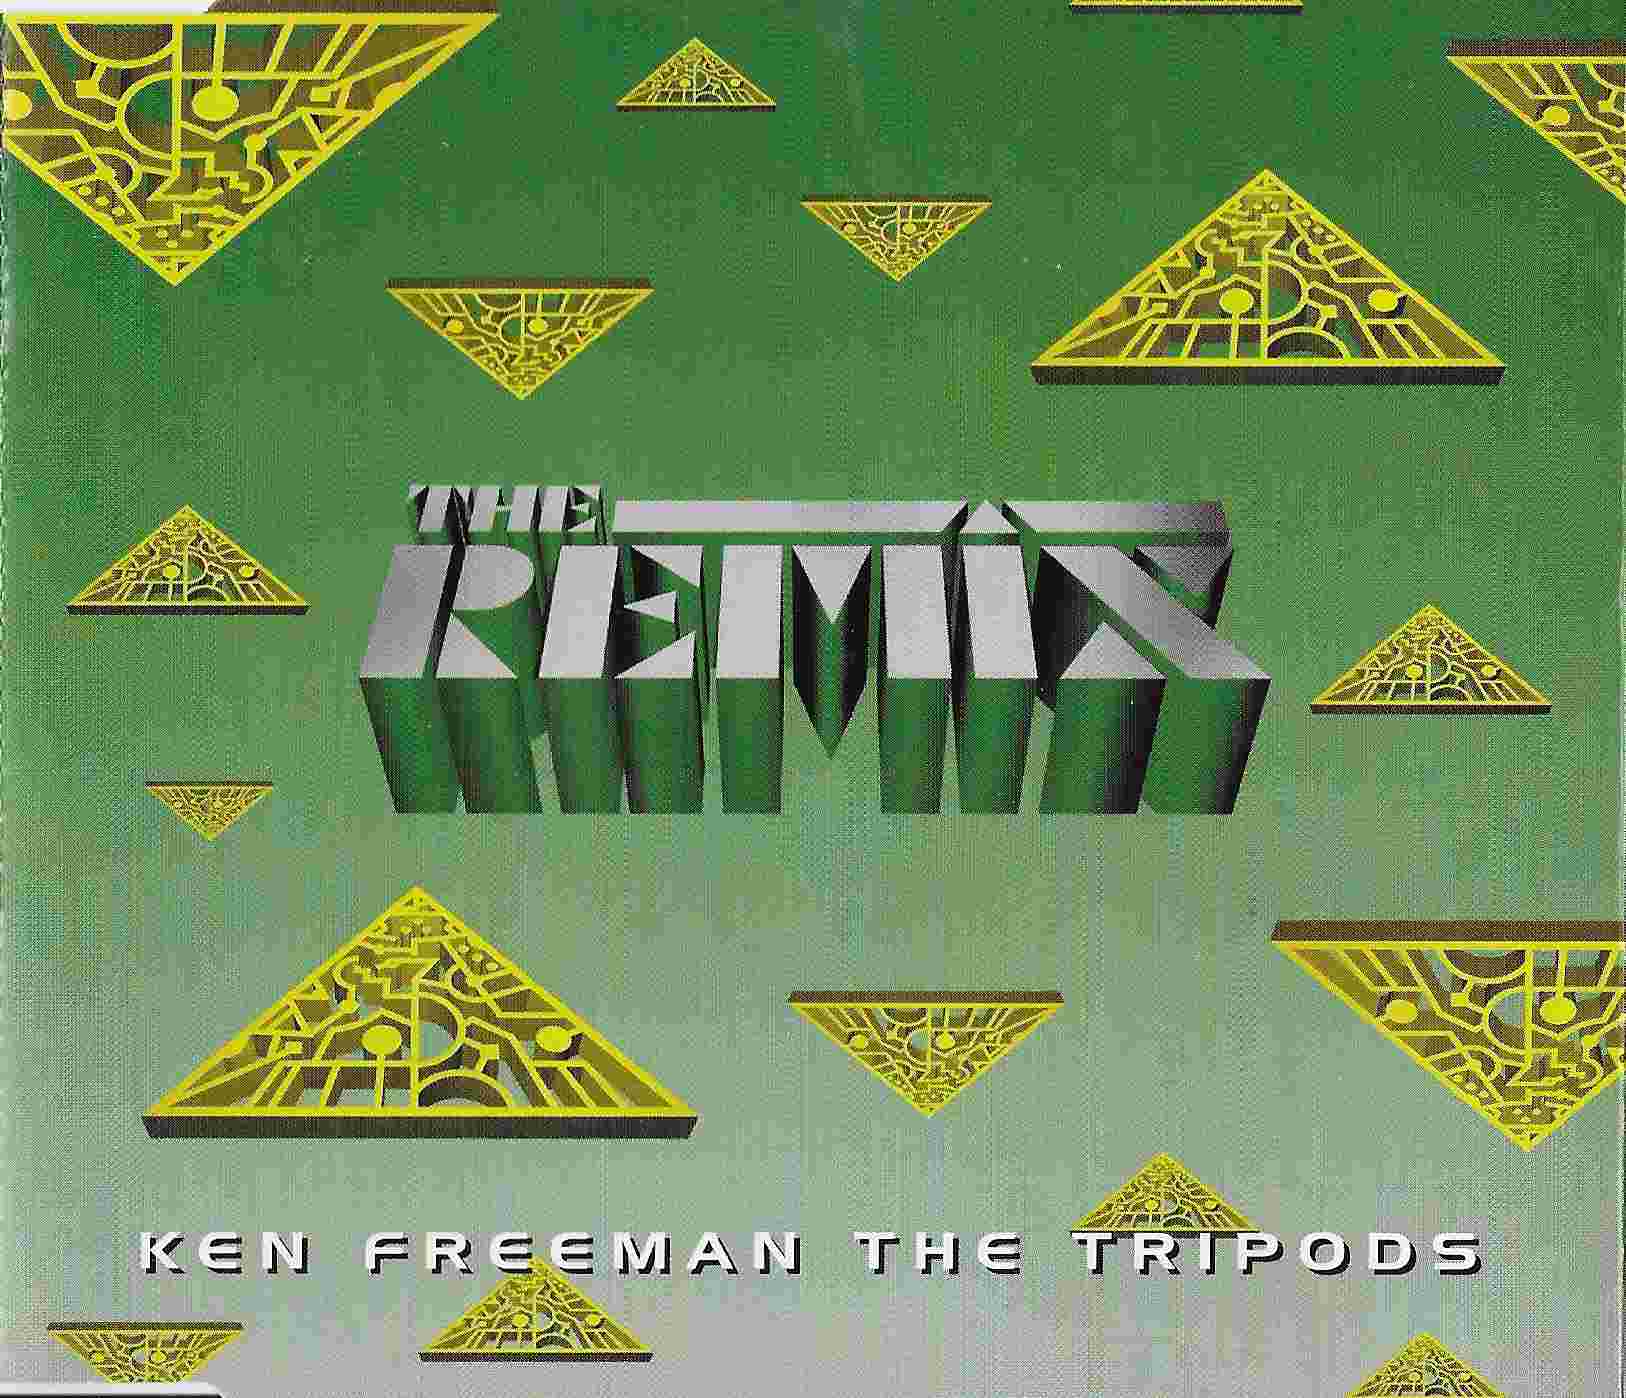 Picture of GERCD 1.1 The tripods remix by artist Ken Freeman from the BBC cdsingles - Records and Tapes library